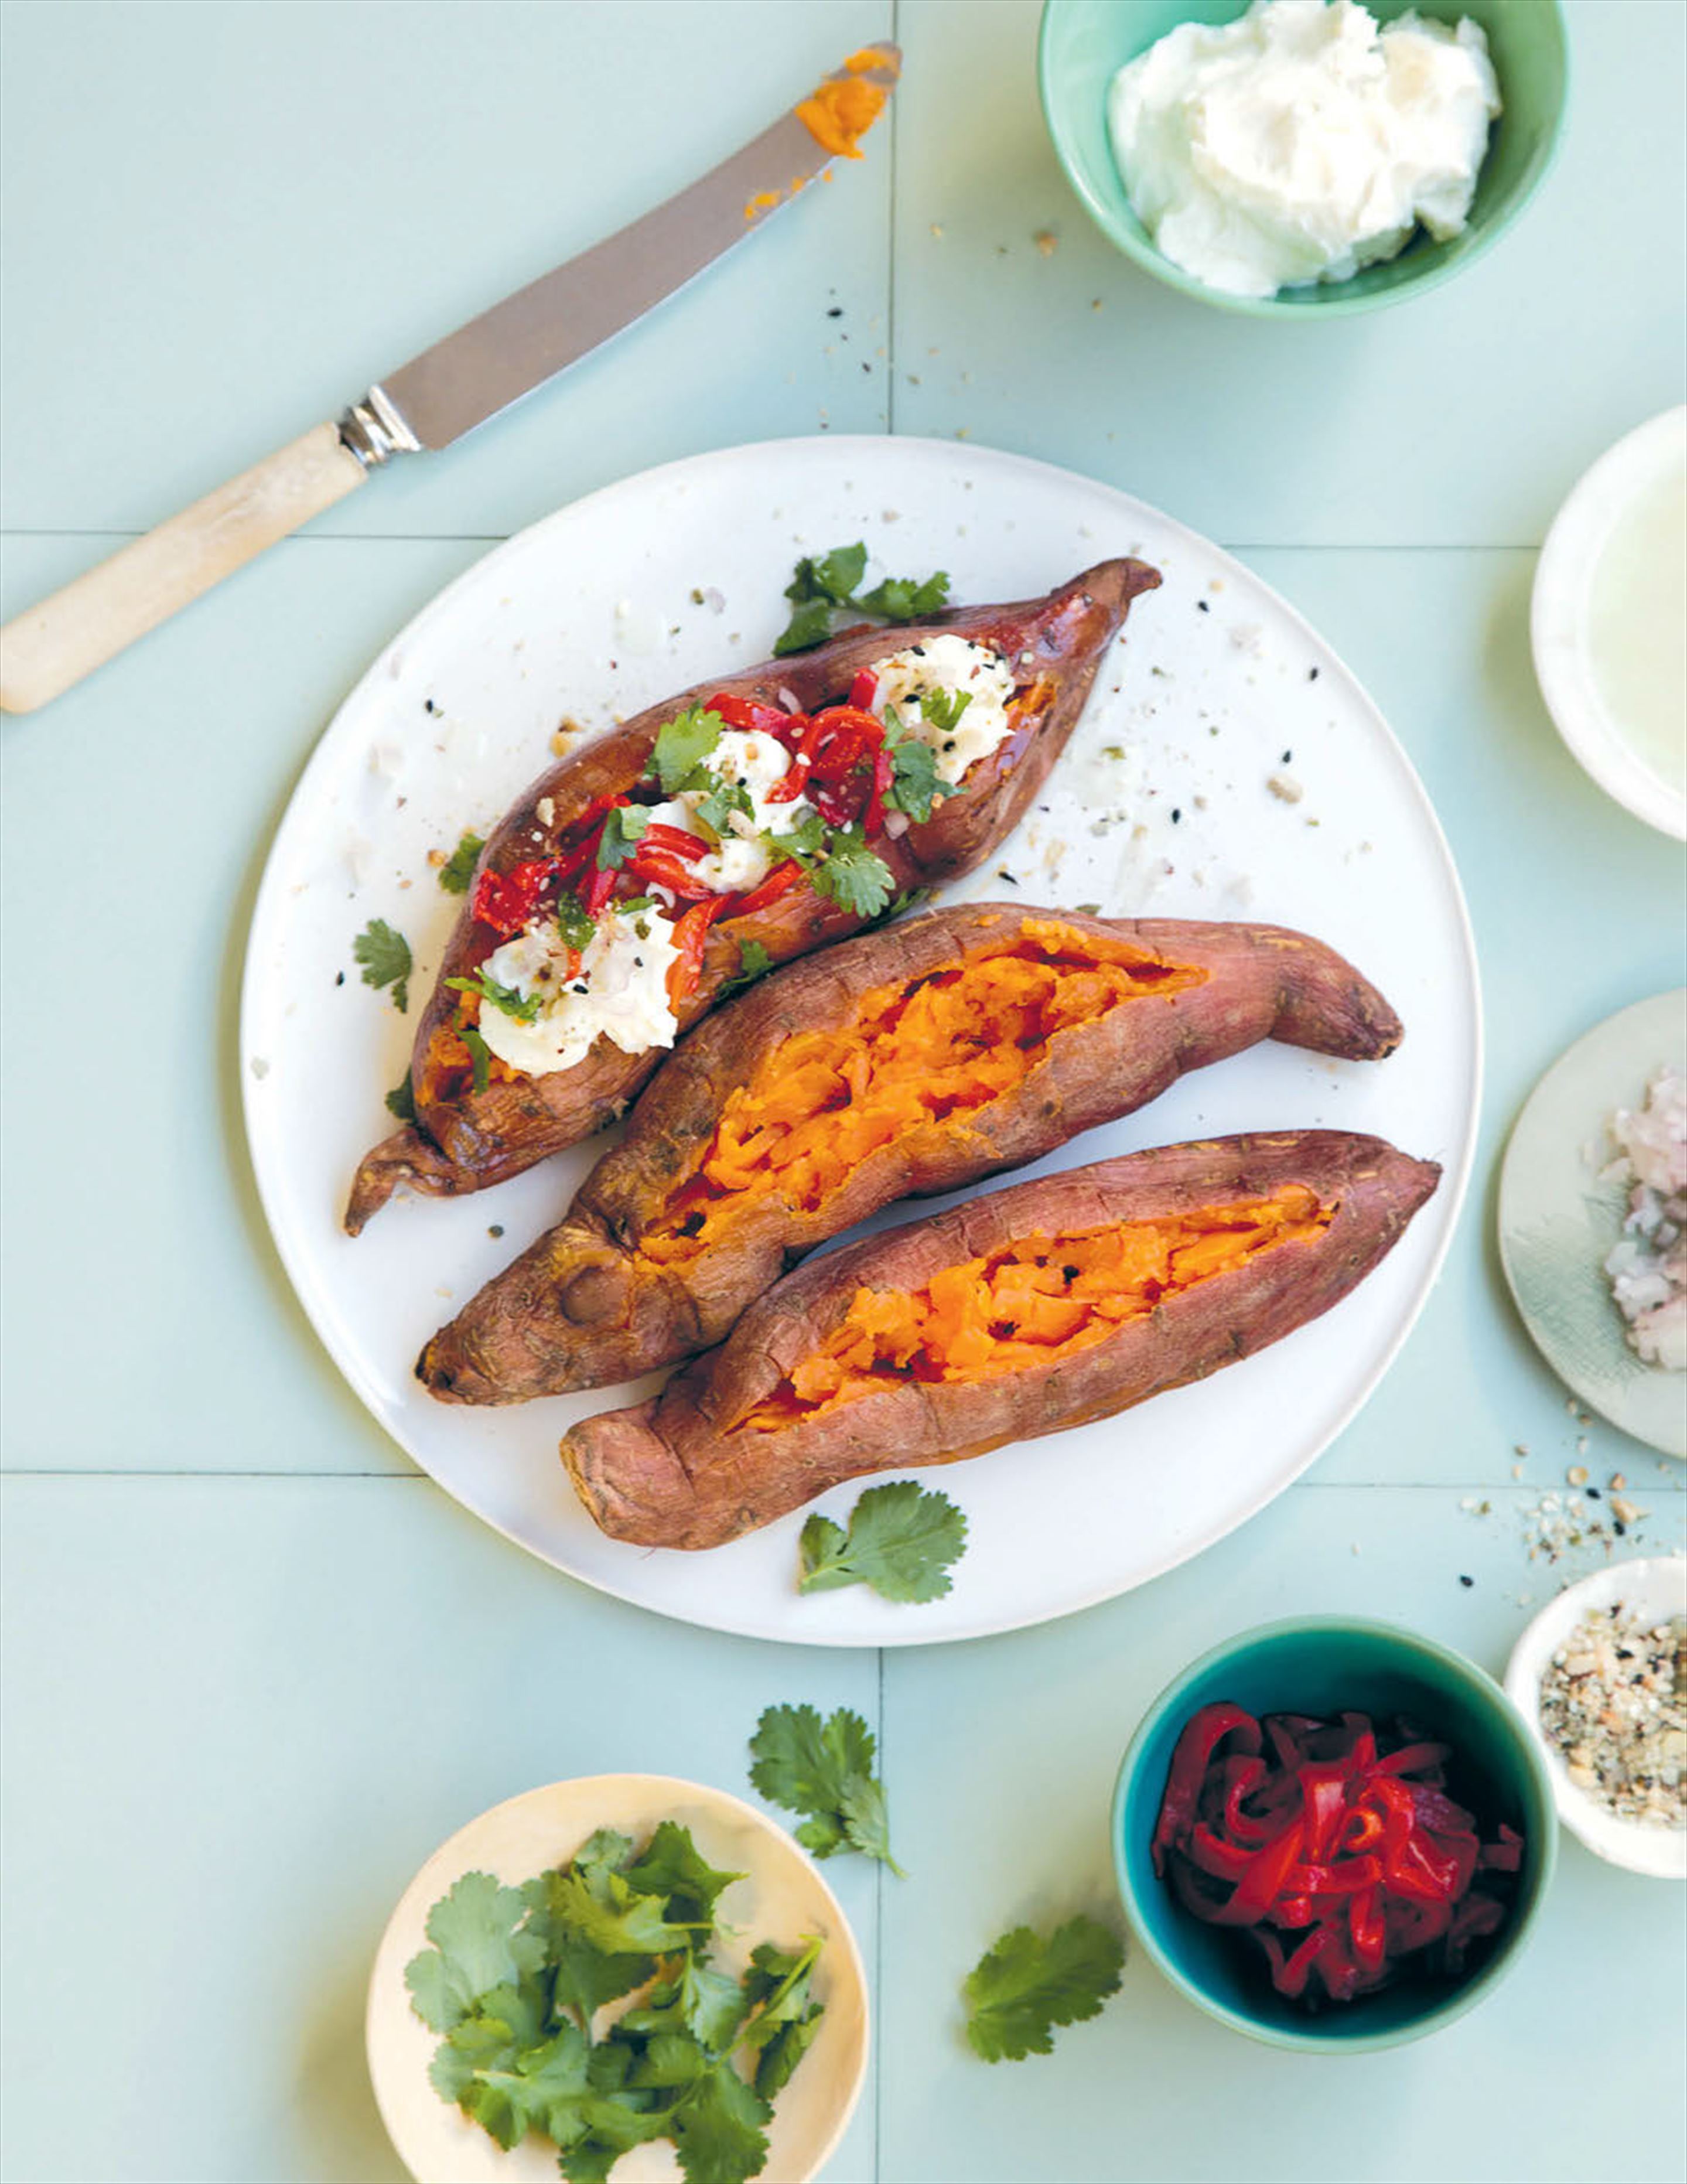 Roasted sweet potatoes with hot red Turkish peppers and labneh